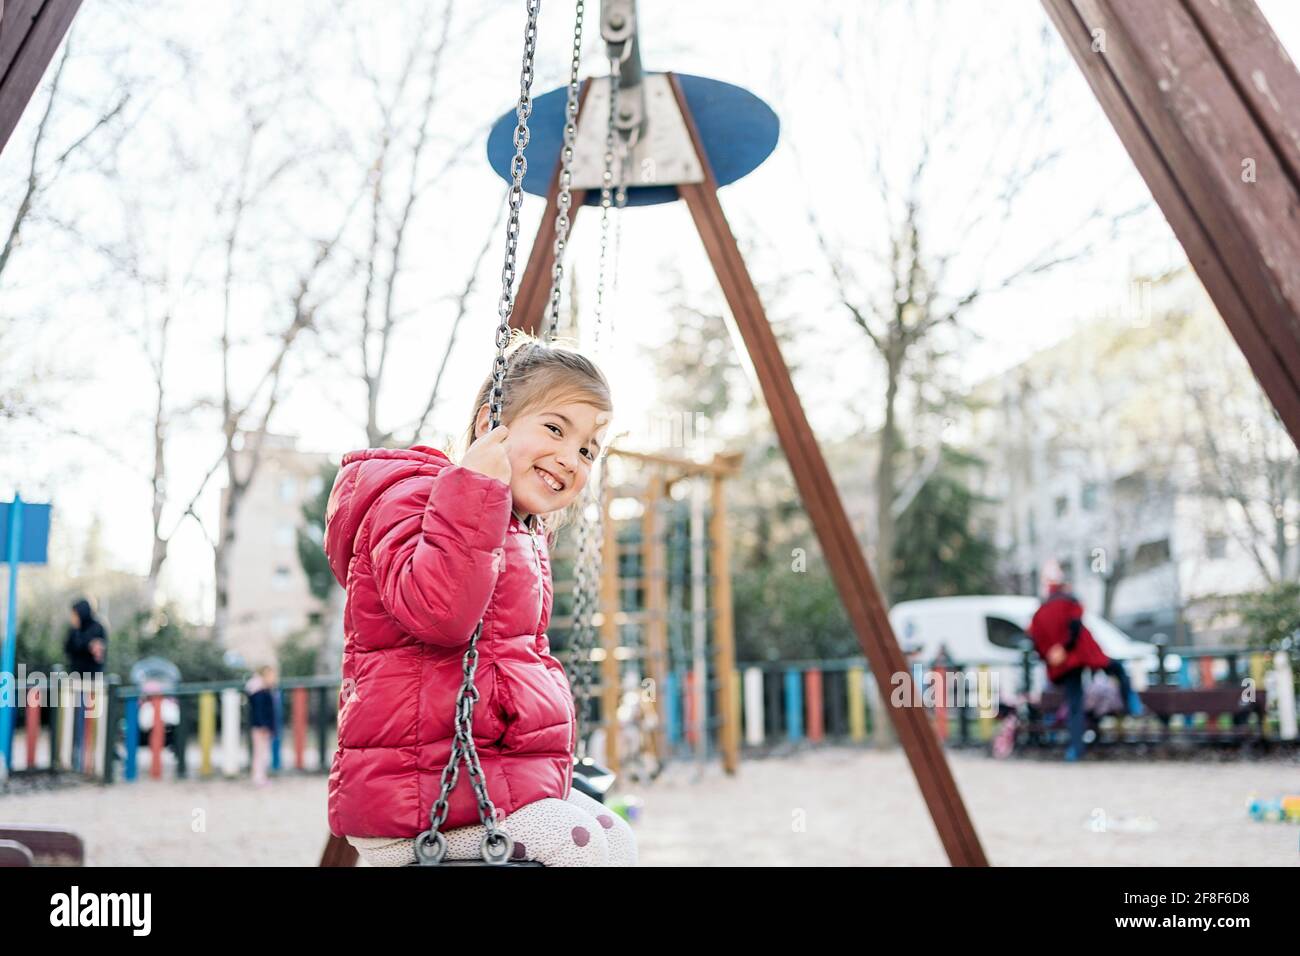 A school age Girl smiling joyfully while riding on the swings in the park Stock Photo